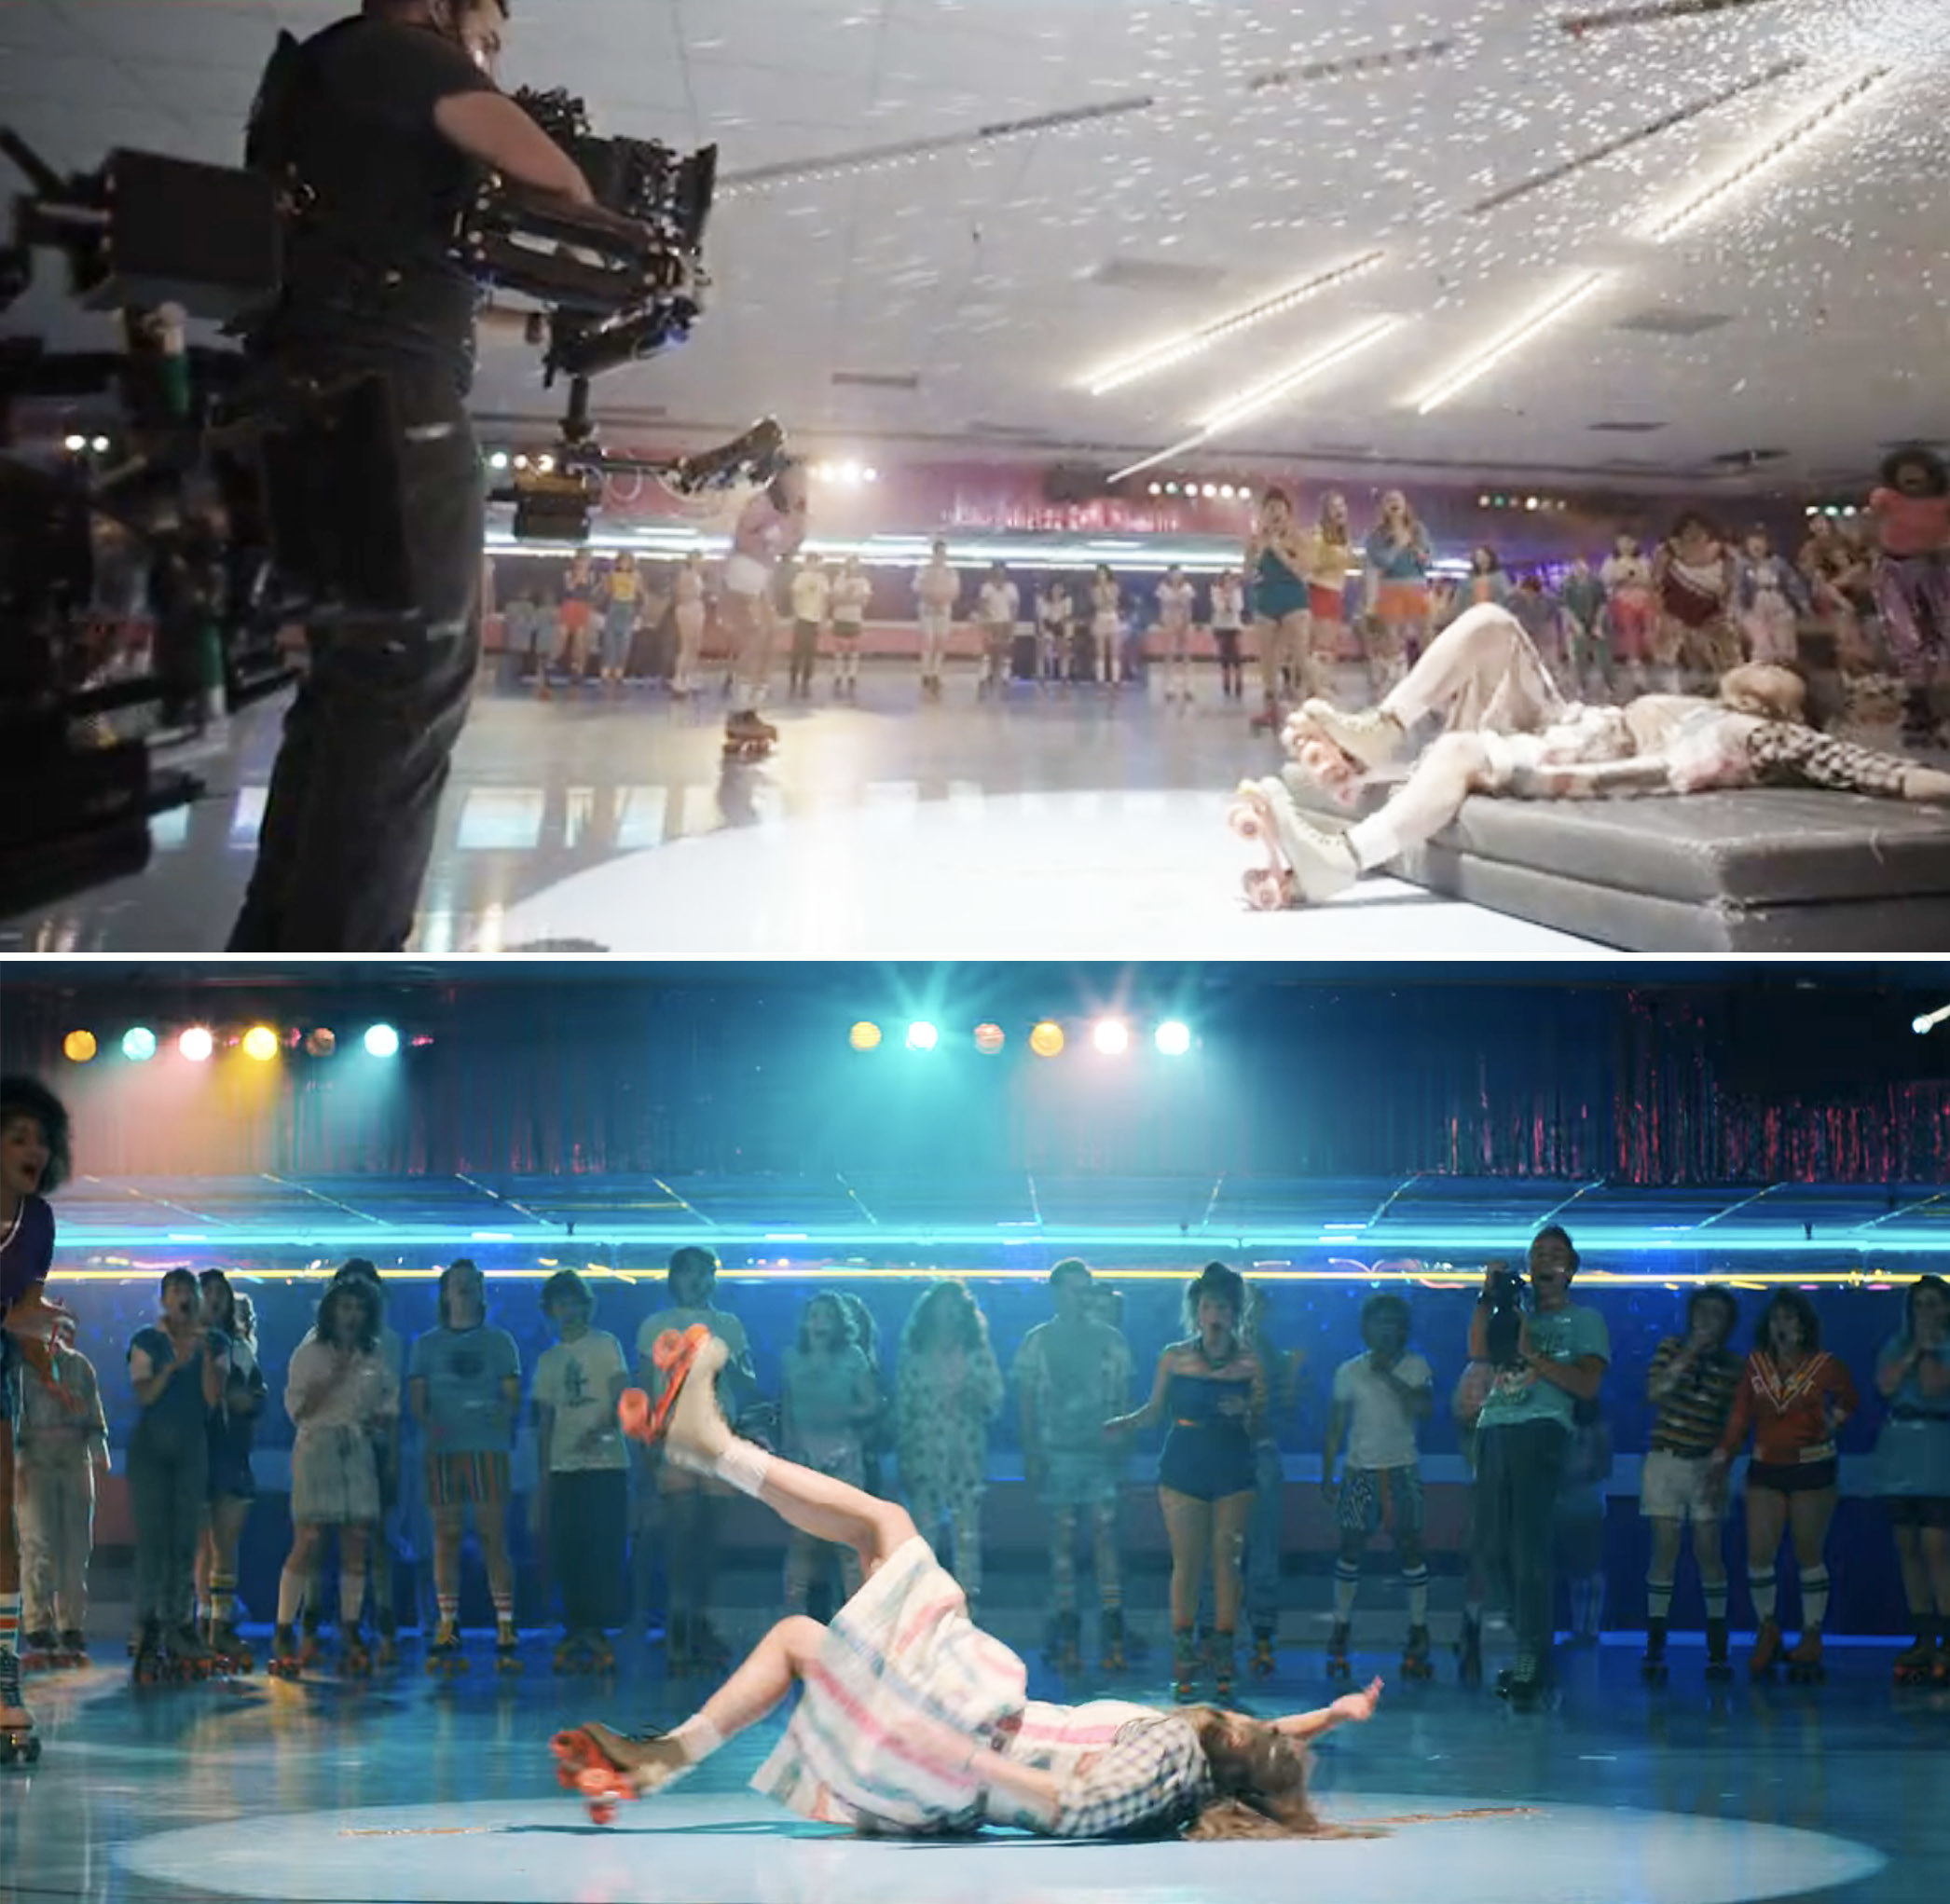 Millie falling onto a stunt pad vs Eleven falling onto the ground